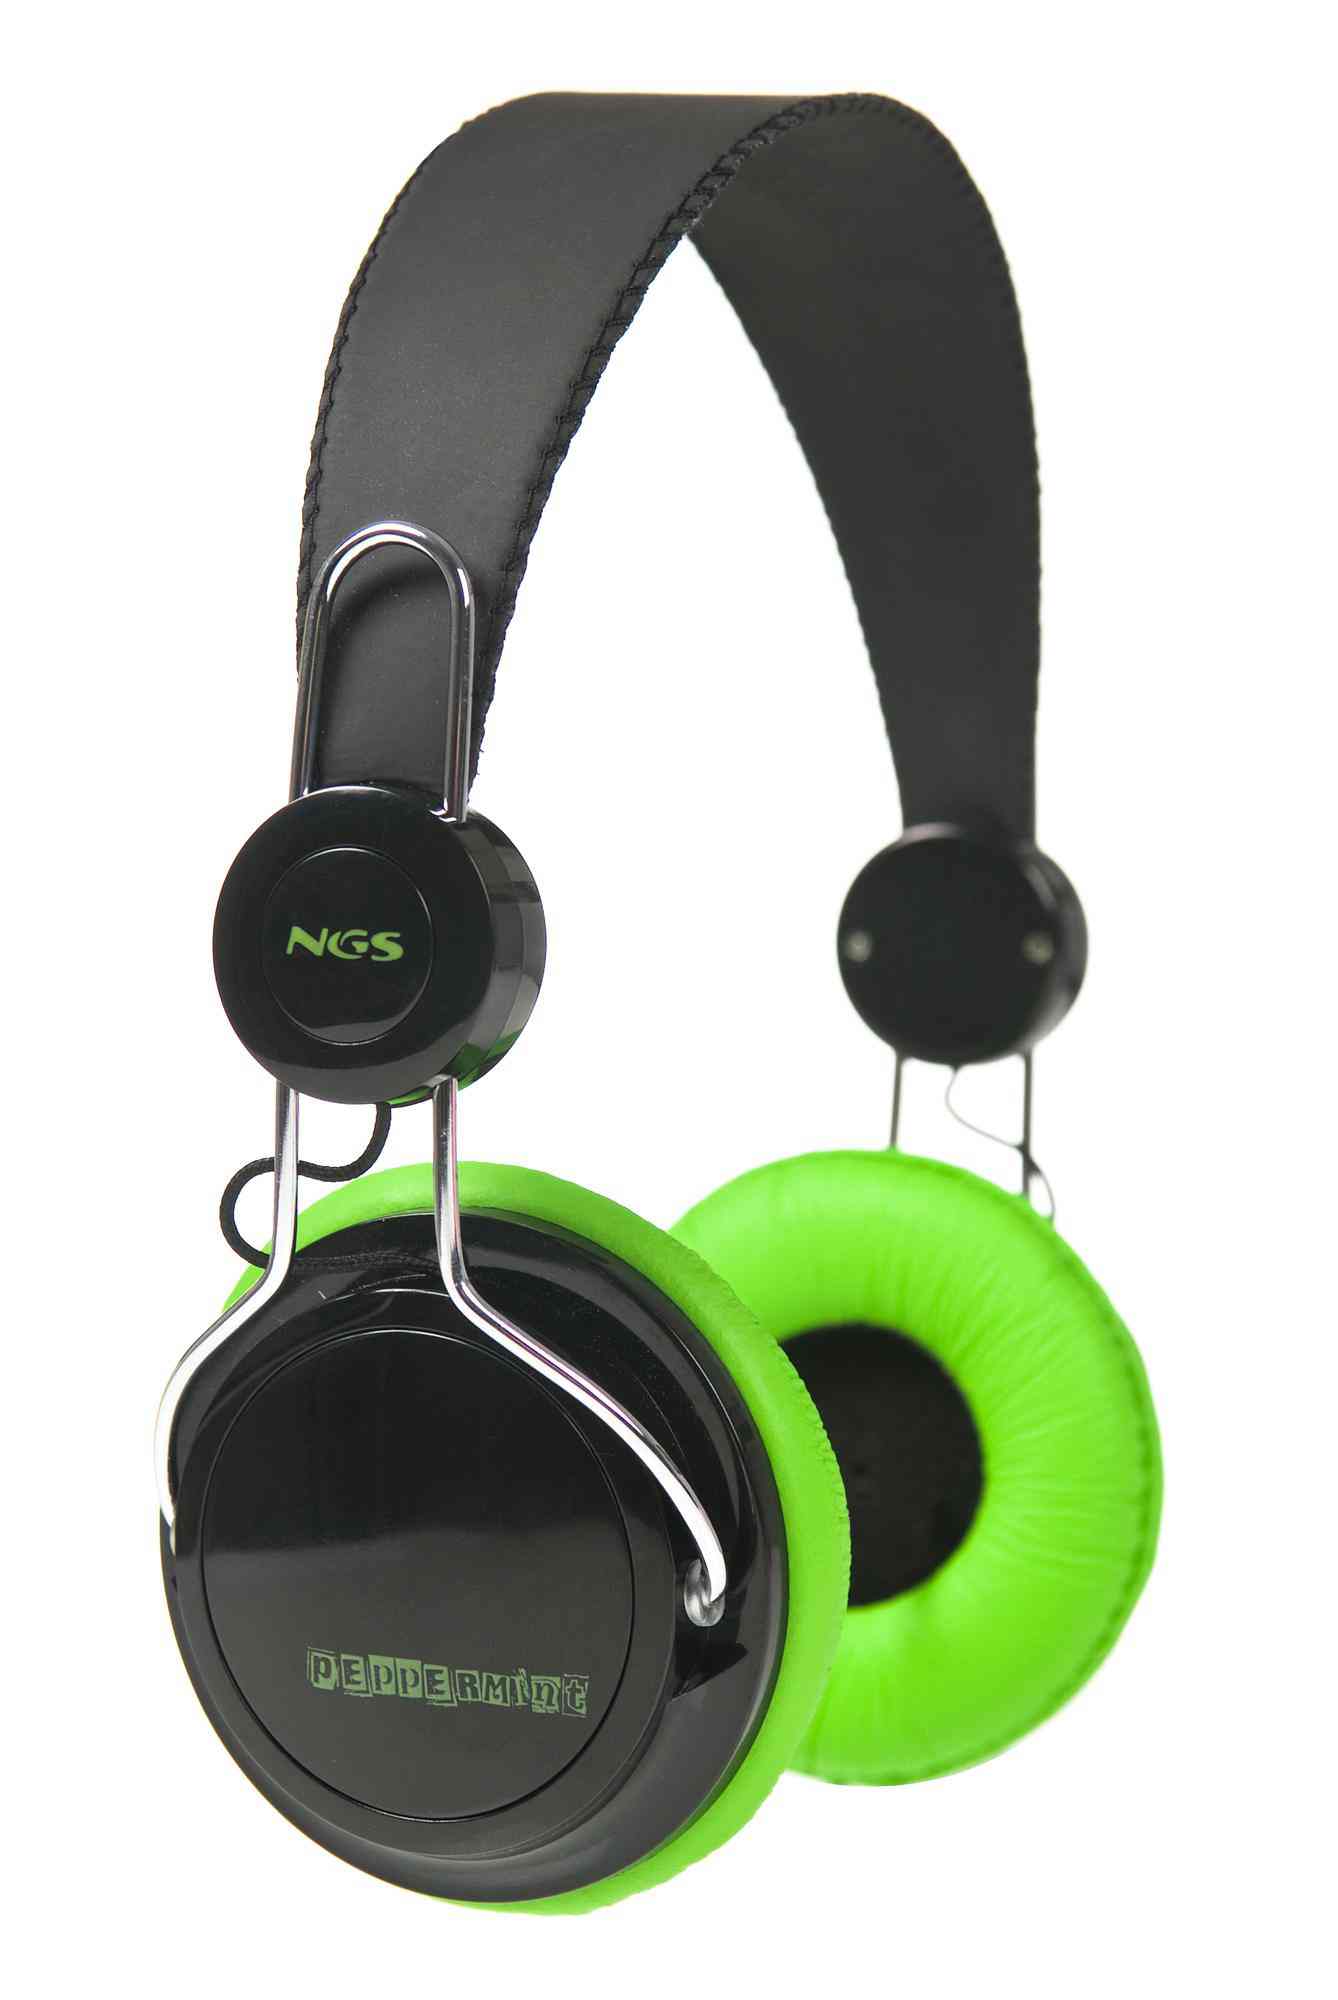 Auriculares Ngs Peppermint Negroverde